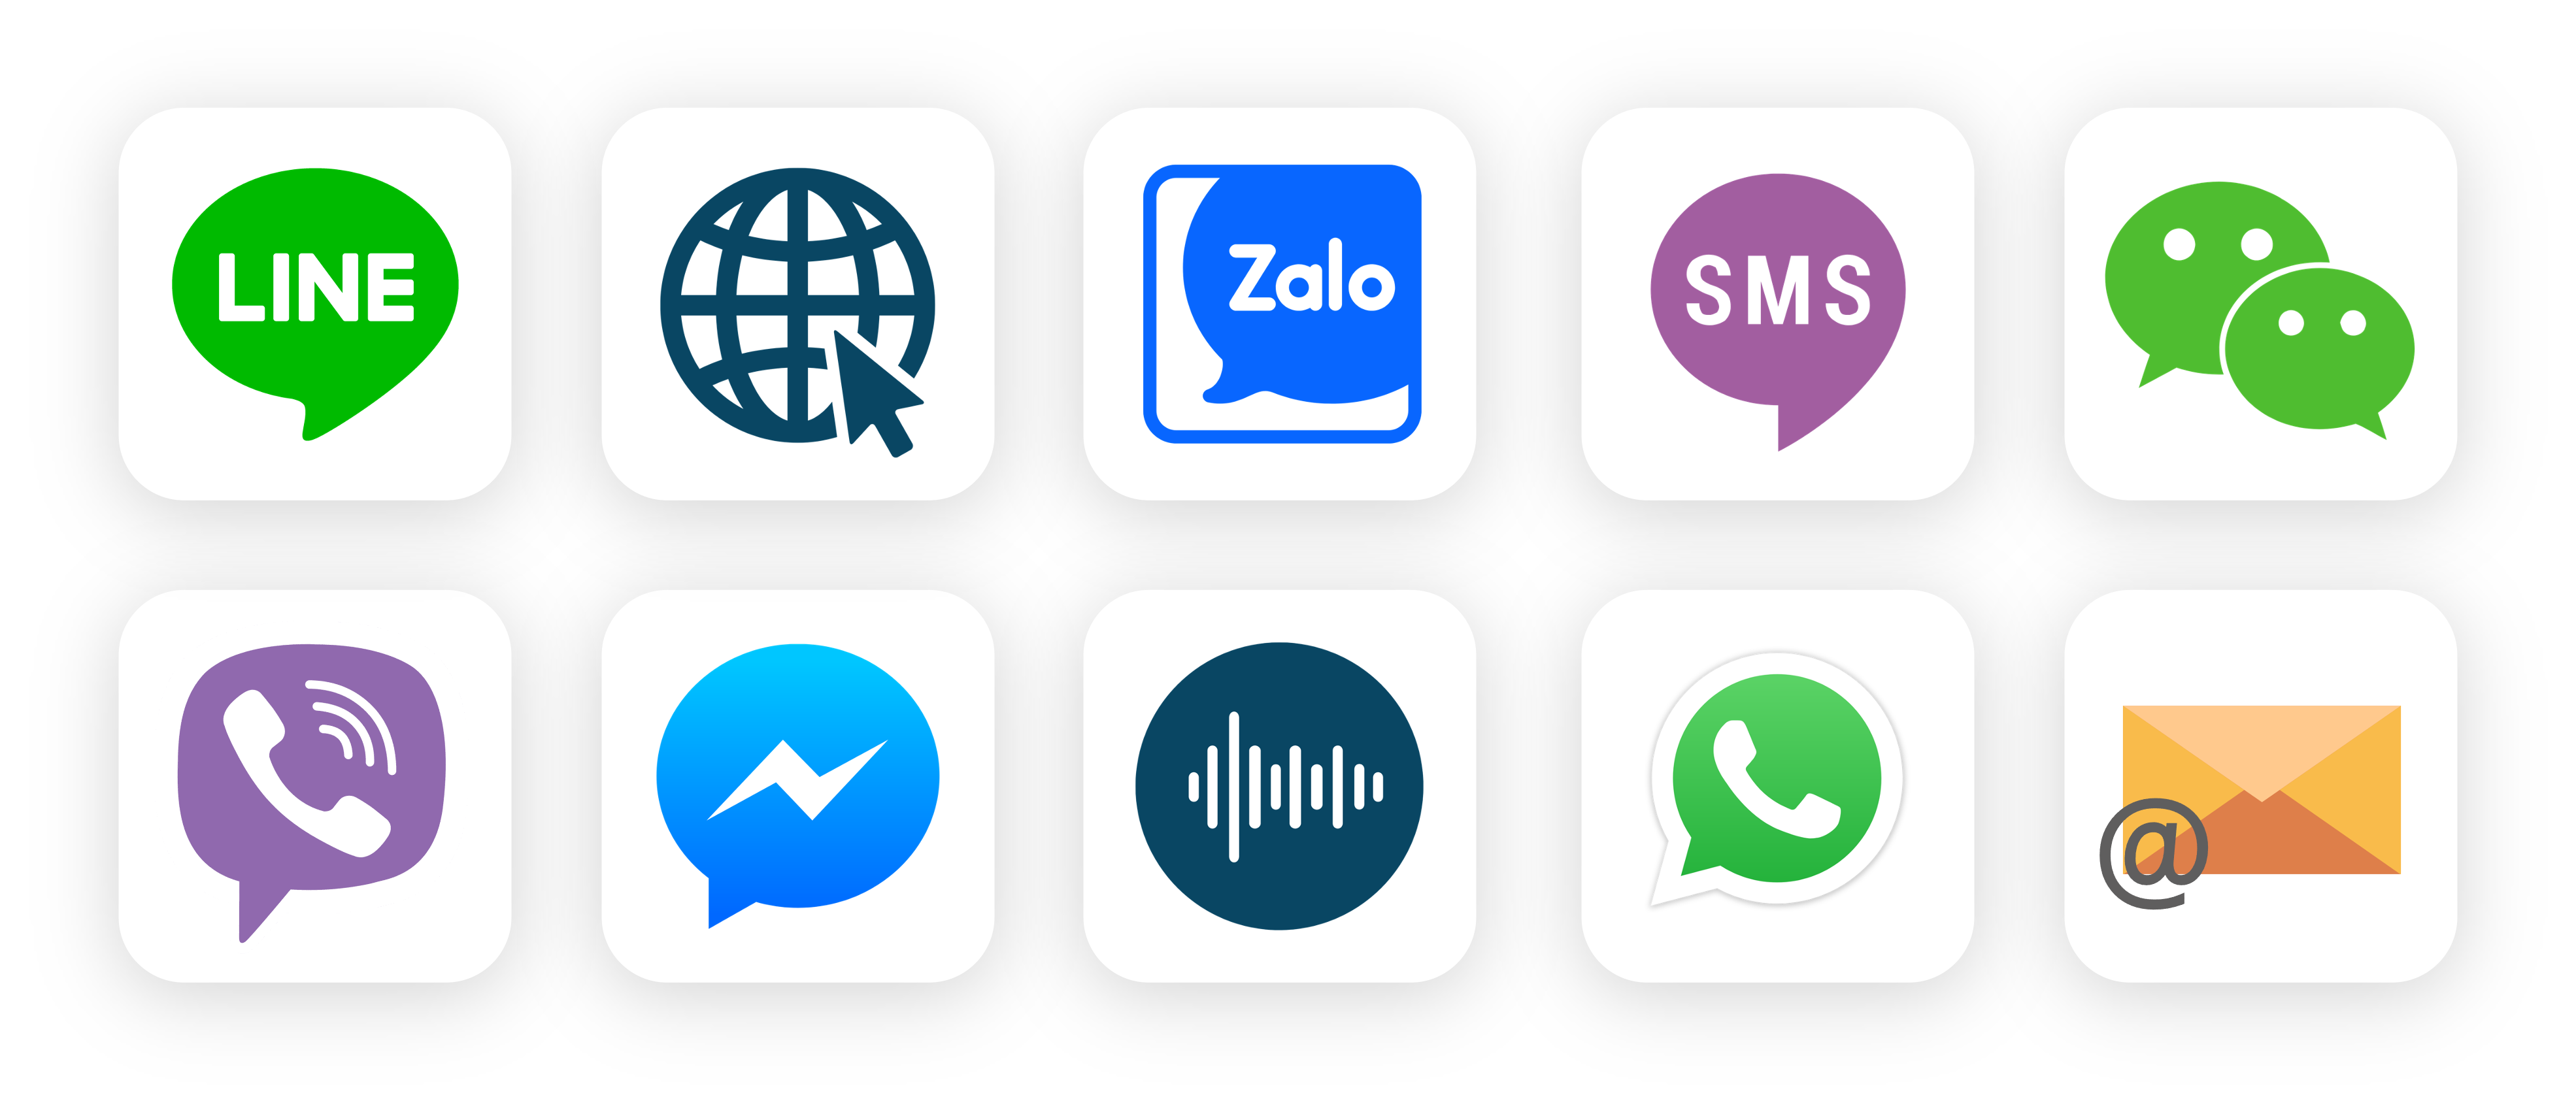 Communication channel icons